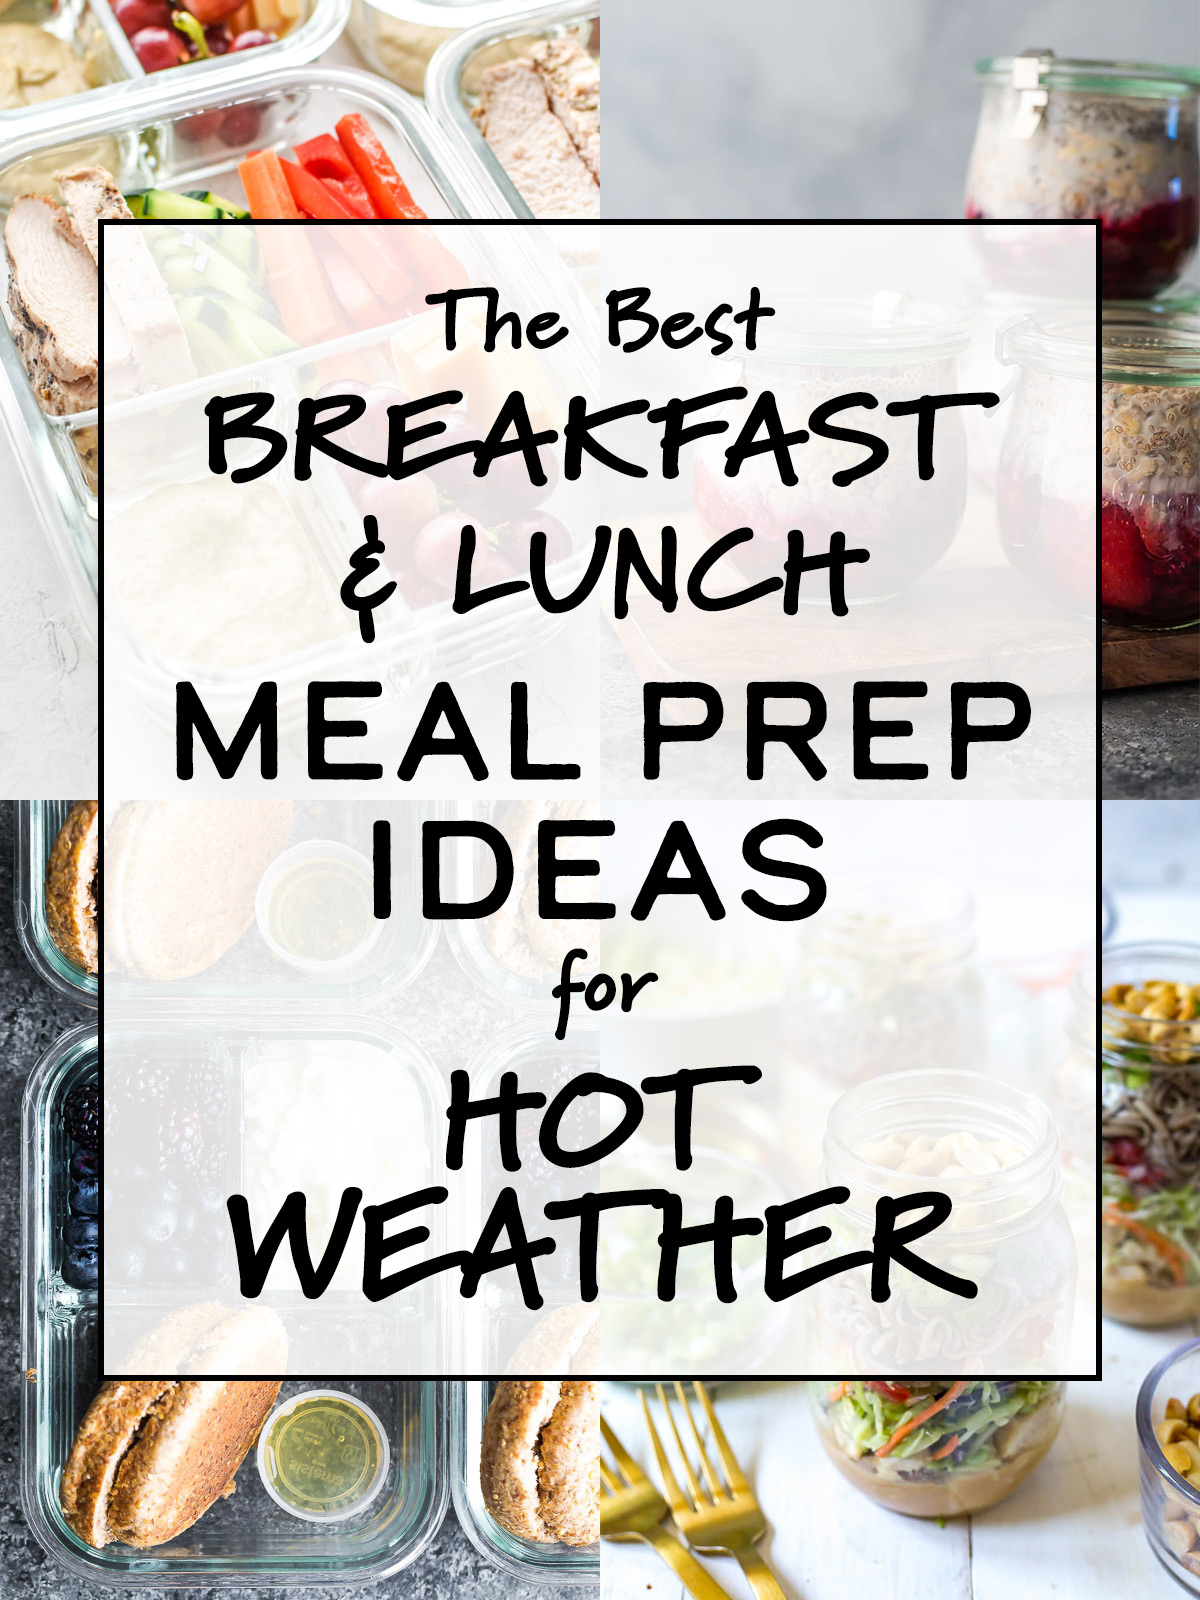 cover image for article The Best Breakfast & Lunch Meal Prep Ideas for Hot Weather